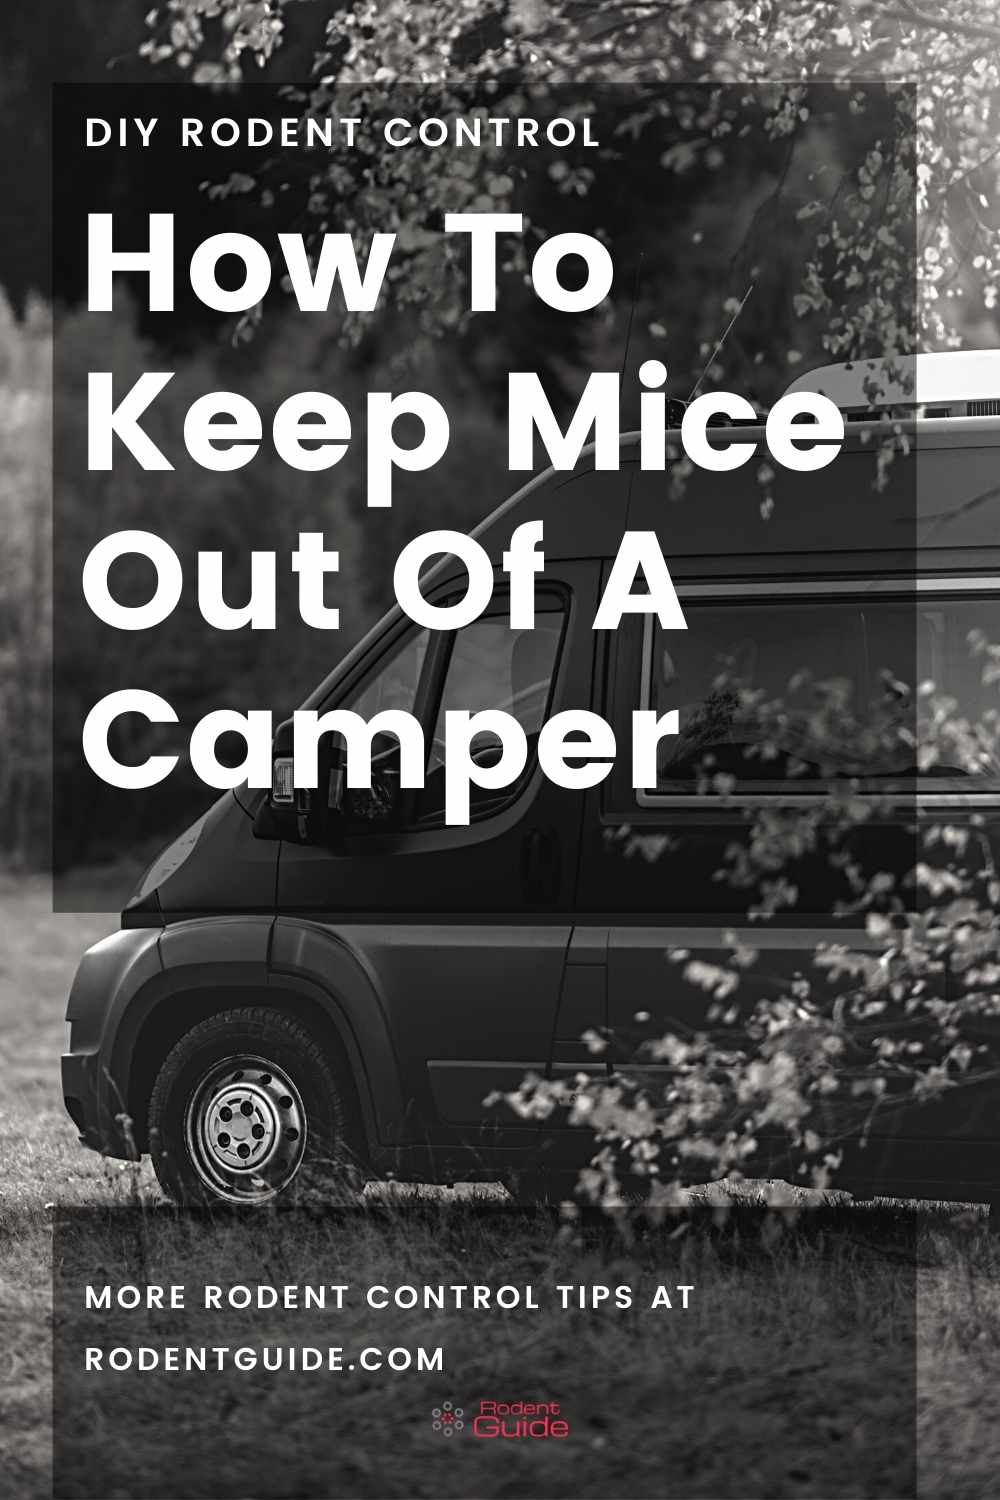 How To Keep Mice Out Of A Camper